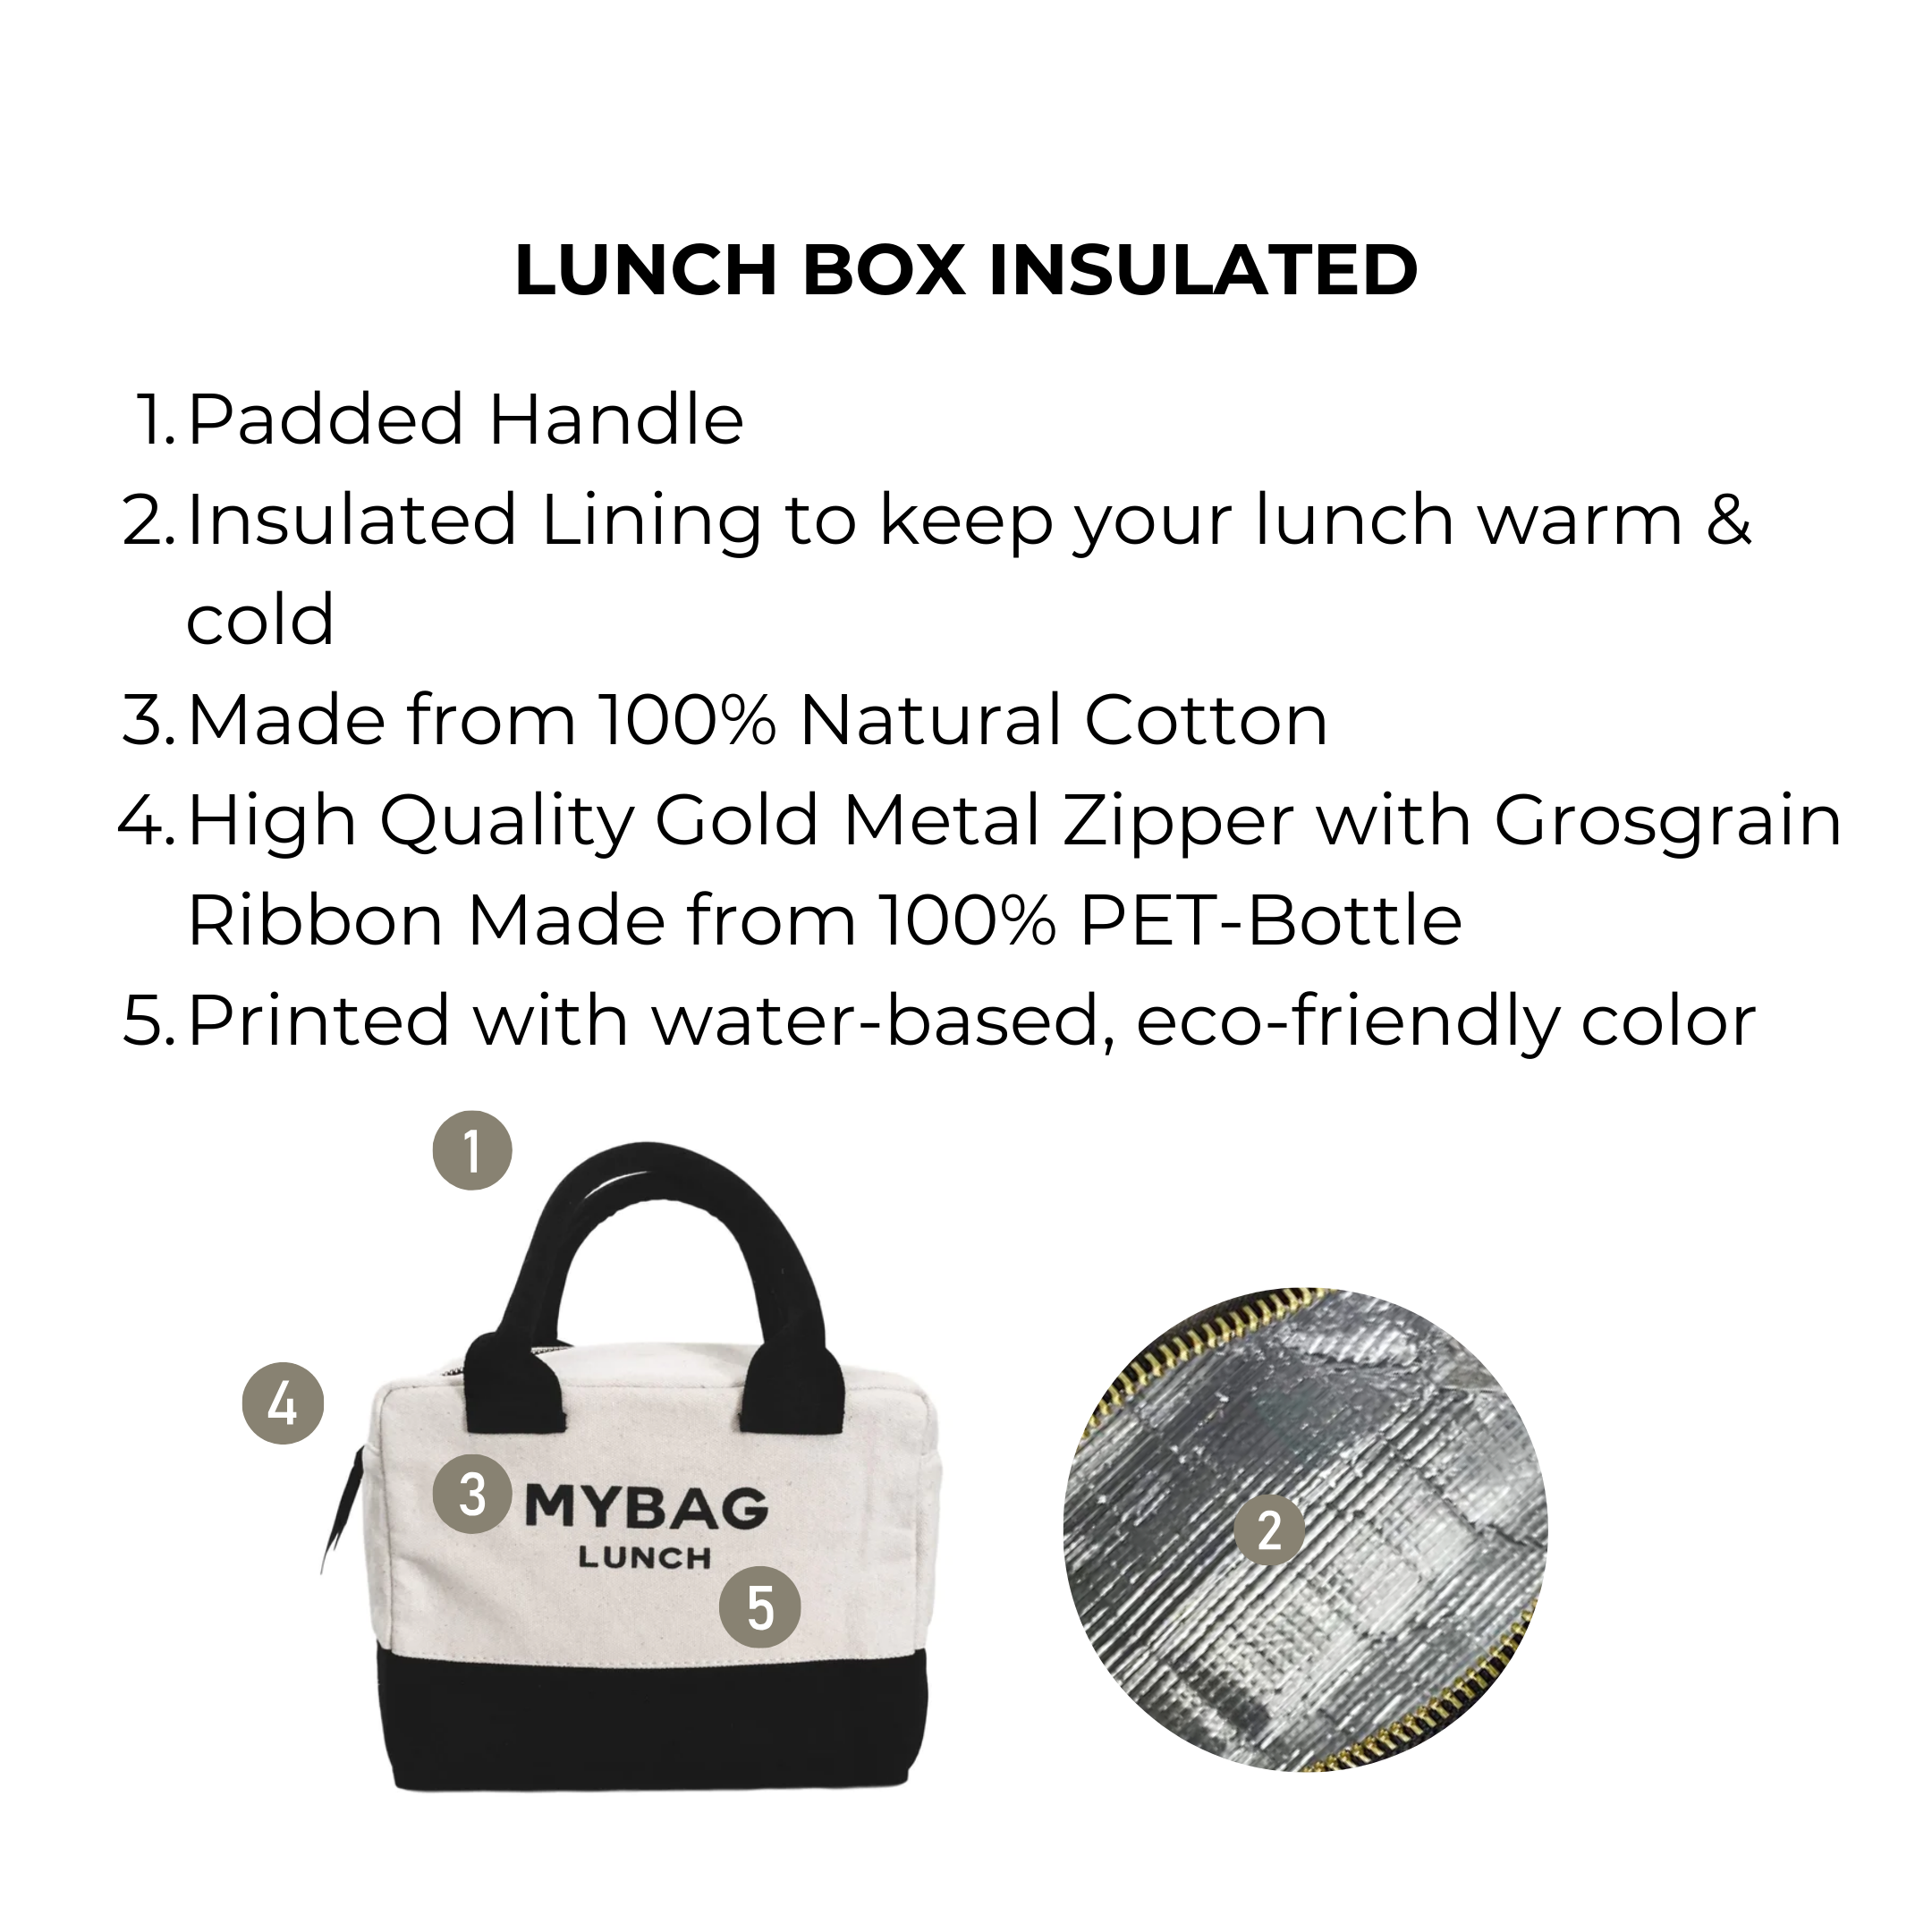 Lunch Box Insulated, Cream | Bag-all